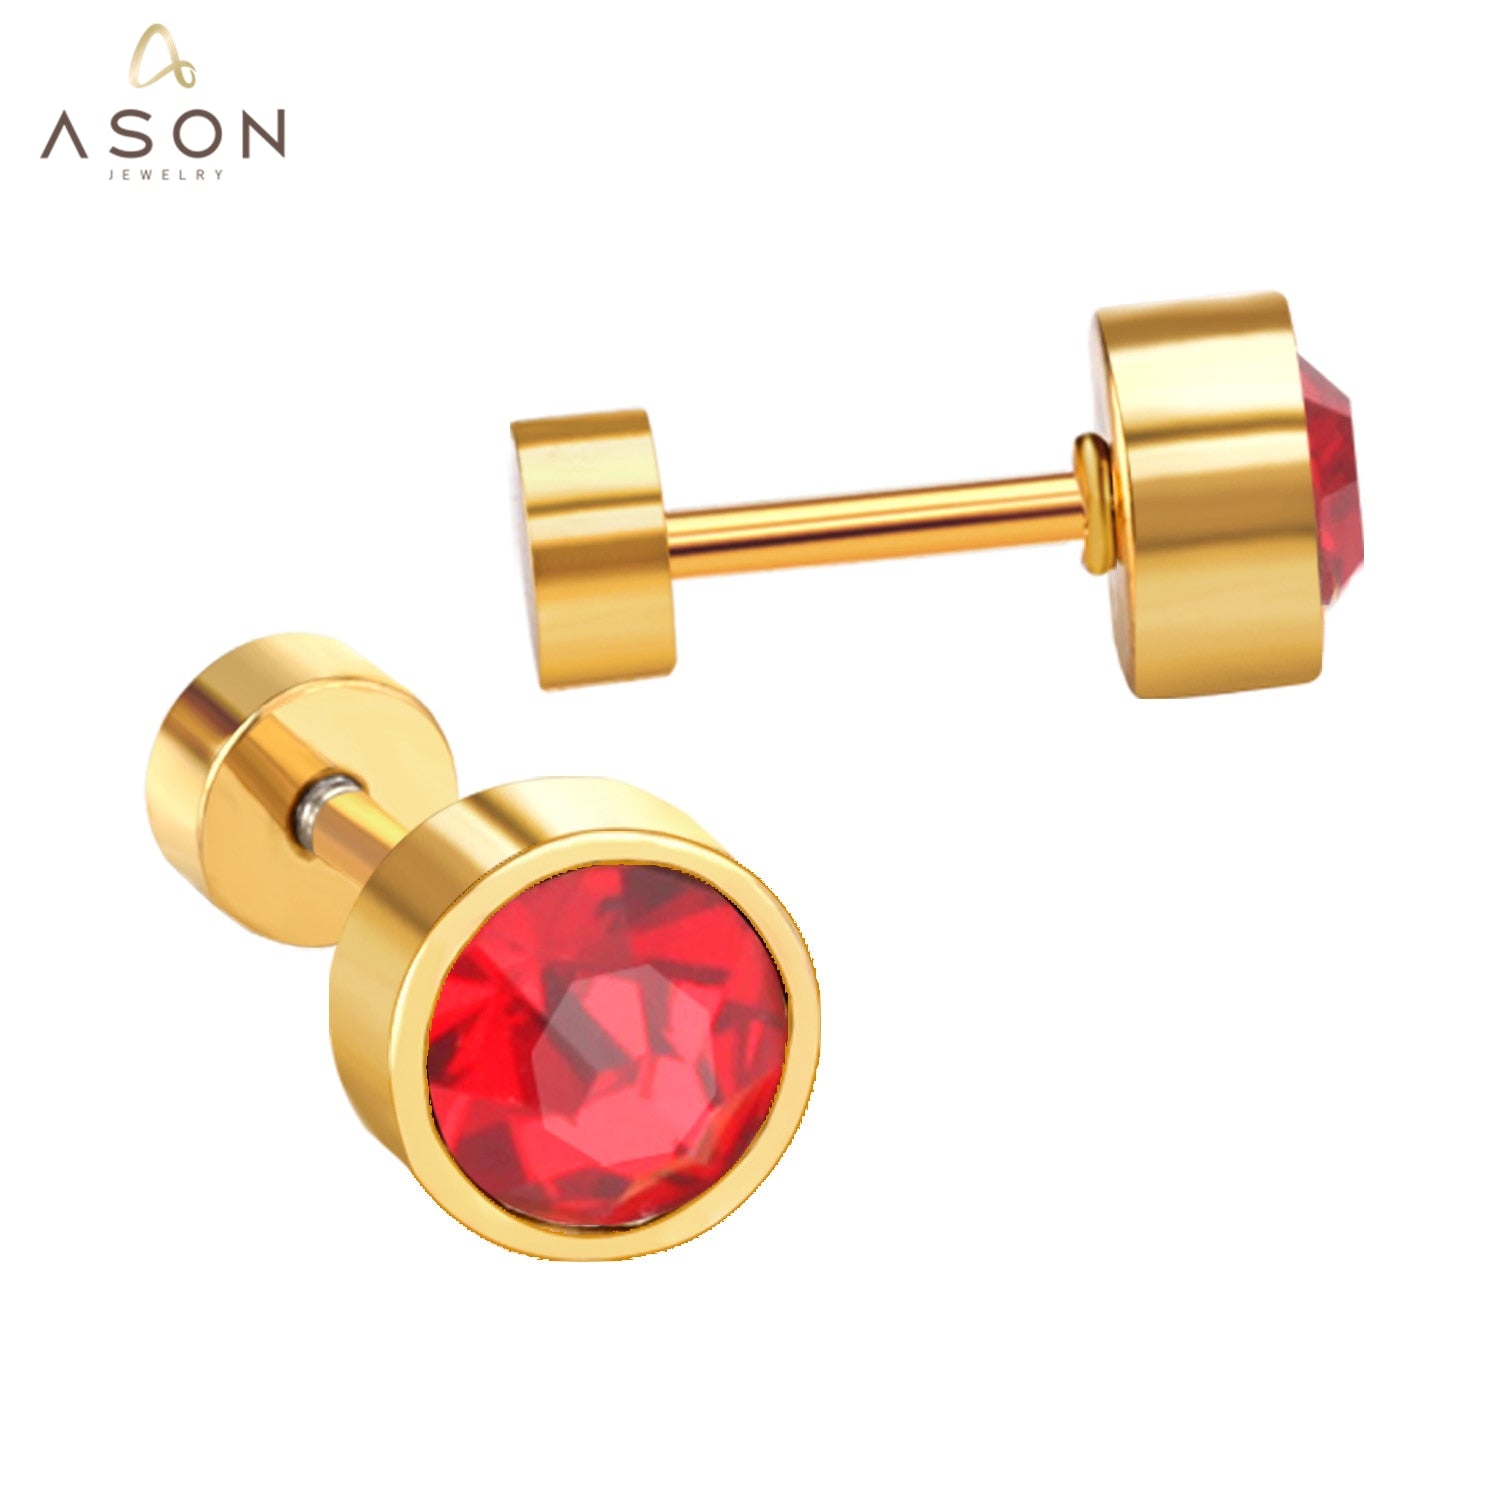 ASONSTEEL Anti-allergy Round Crystal Earring for Women Stainless Steel AB/Red/Blue/Pink Color Screw Stud Earring Collier Bijoux